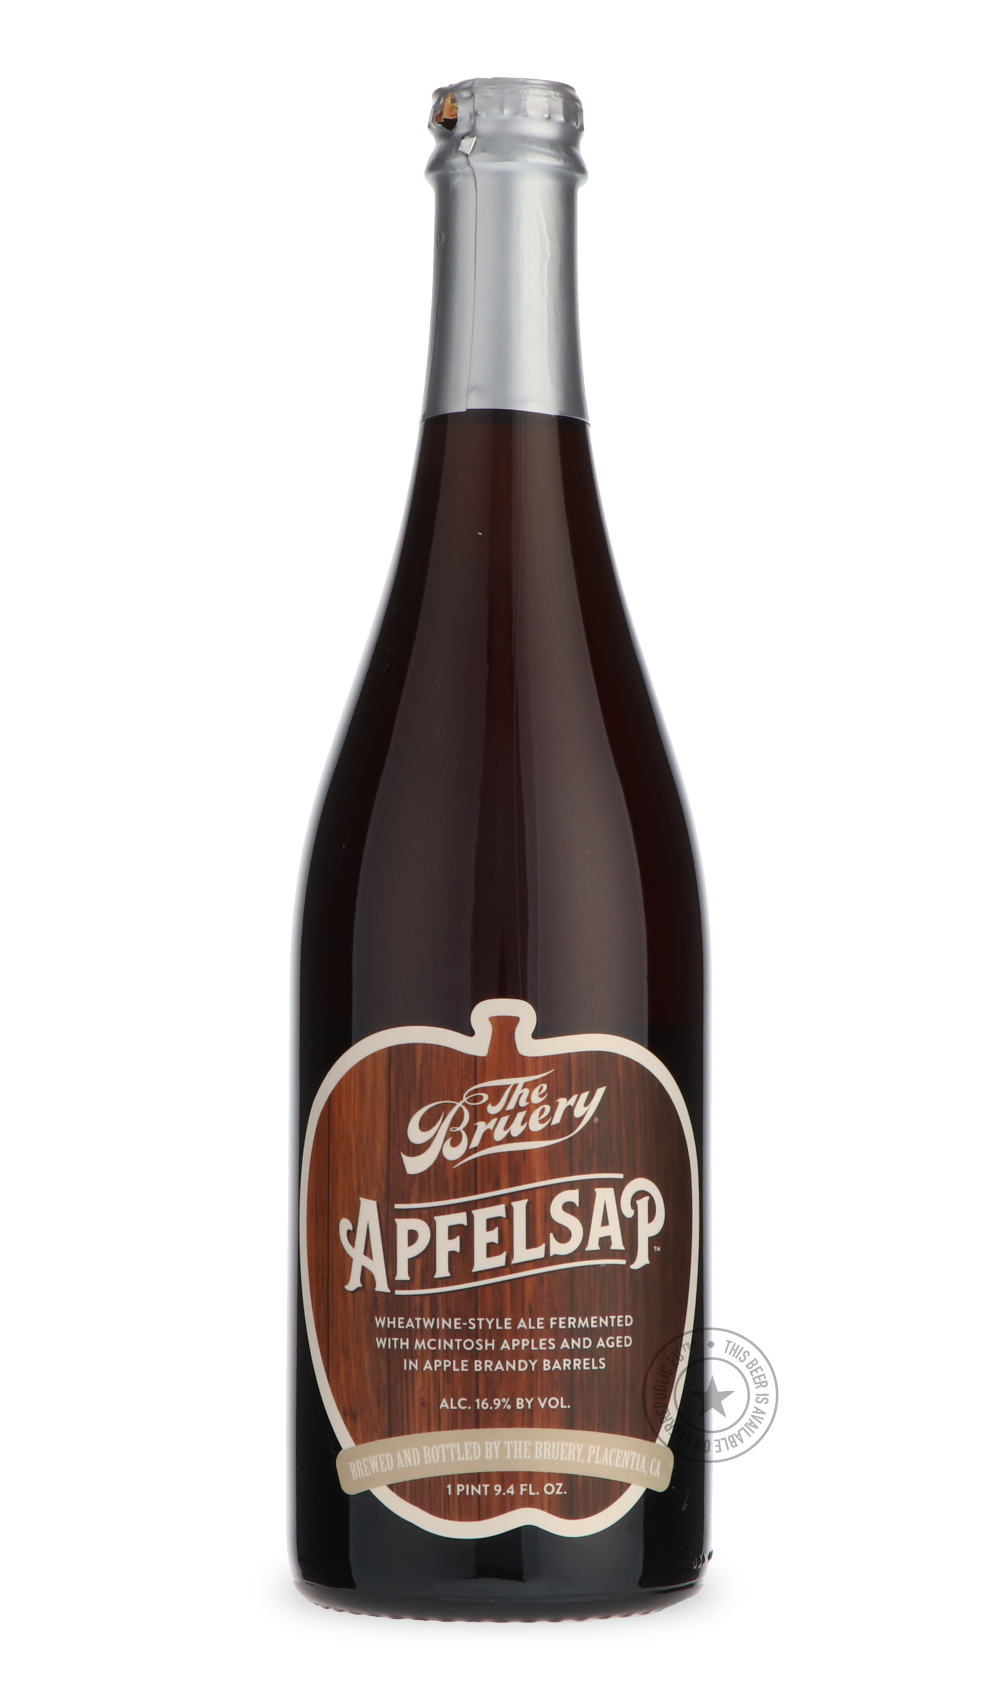 -The Bruery- Apfelsap-Brown & Dark- Only @ Beer Republic - The best online beer store for American & Canadian craft beer - Buy beer online from the USA and Canada - Bier online kopen - Amerikaans bier kopen - Craft beer store - Craft beer kopen - Amerikanisch bier kaufen - Bier online kaufen - Acheter biere online - IPA - Stout - Porter - New England IPA - Hazy IPA - Imperial Stout - Barrel Aged - Barrel Aged Imperial Stout - Brown - Dark beer - Blond - Blonde - Pilsner - Lager - Wheat - Weizen - Amber - Ba